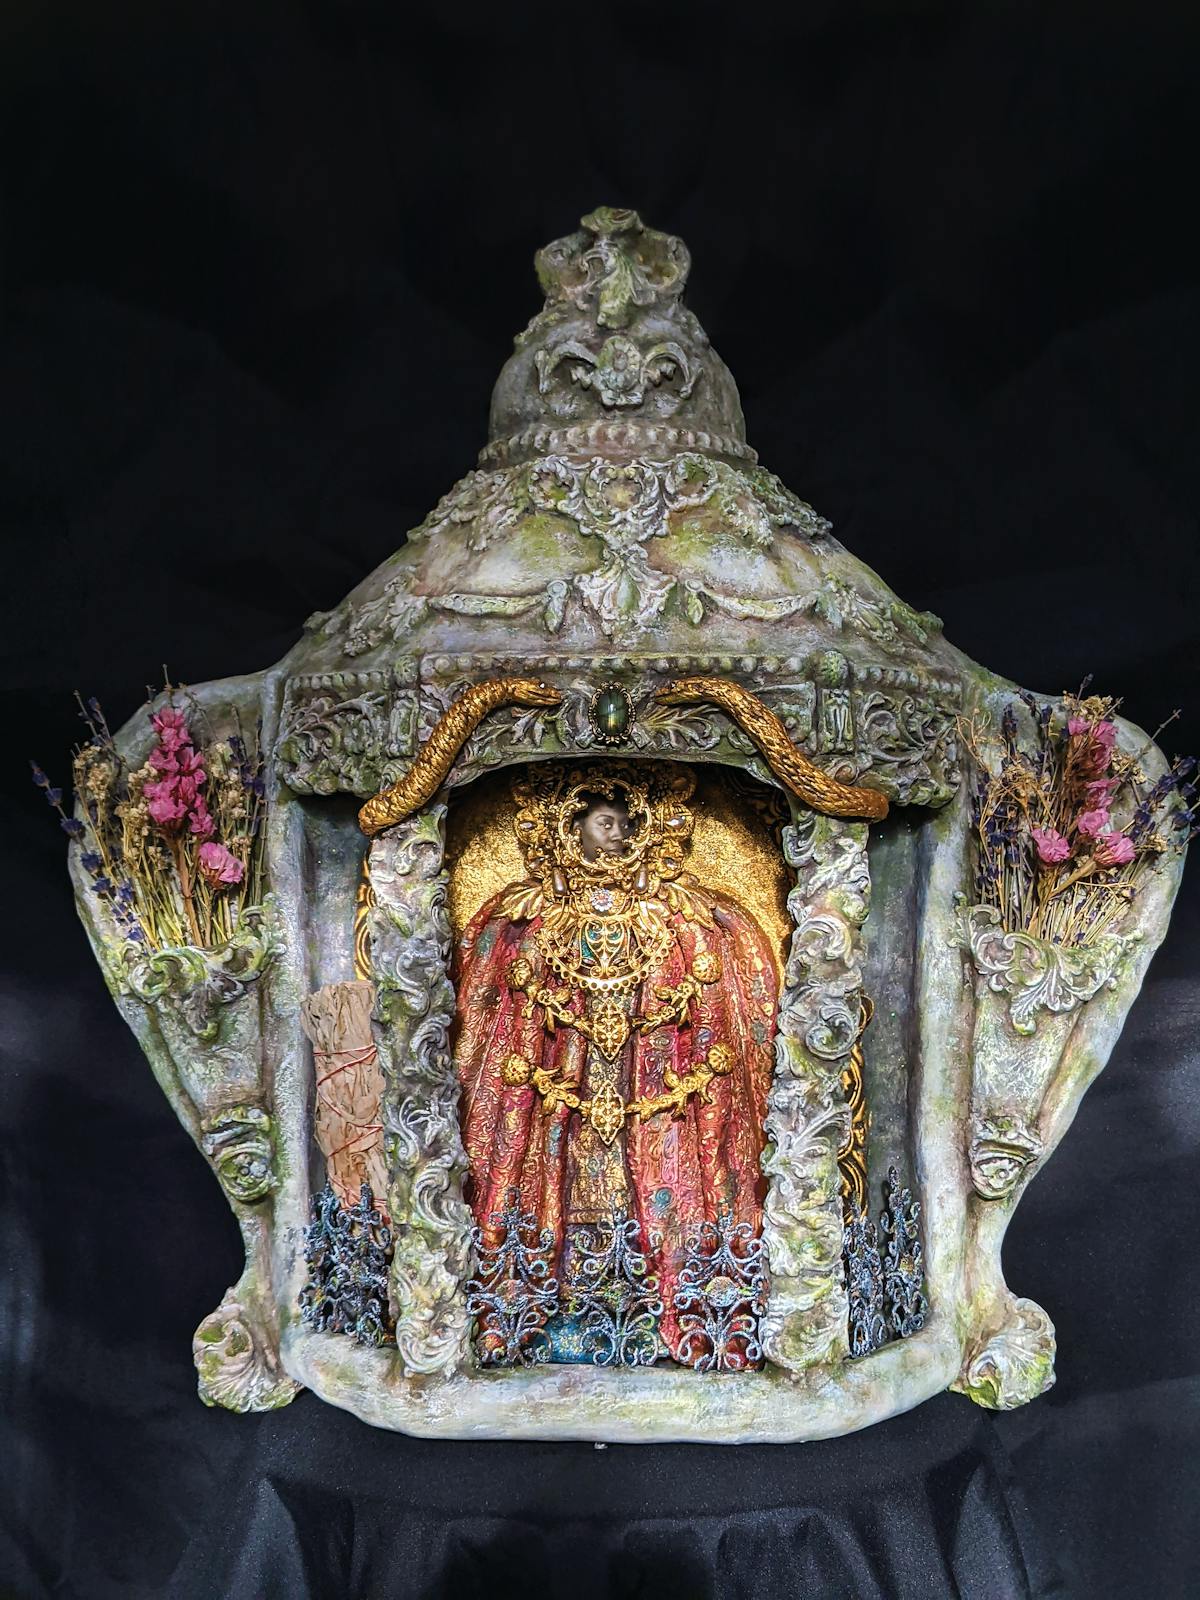 ornate clay alter shrine with flower motifs and gold coating